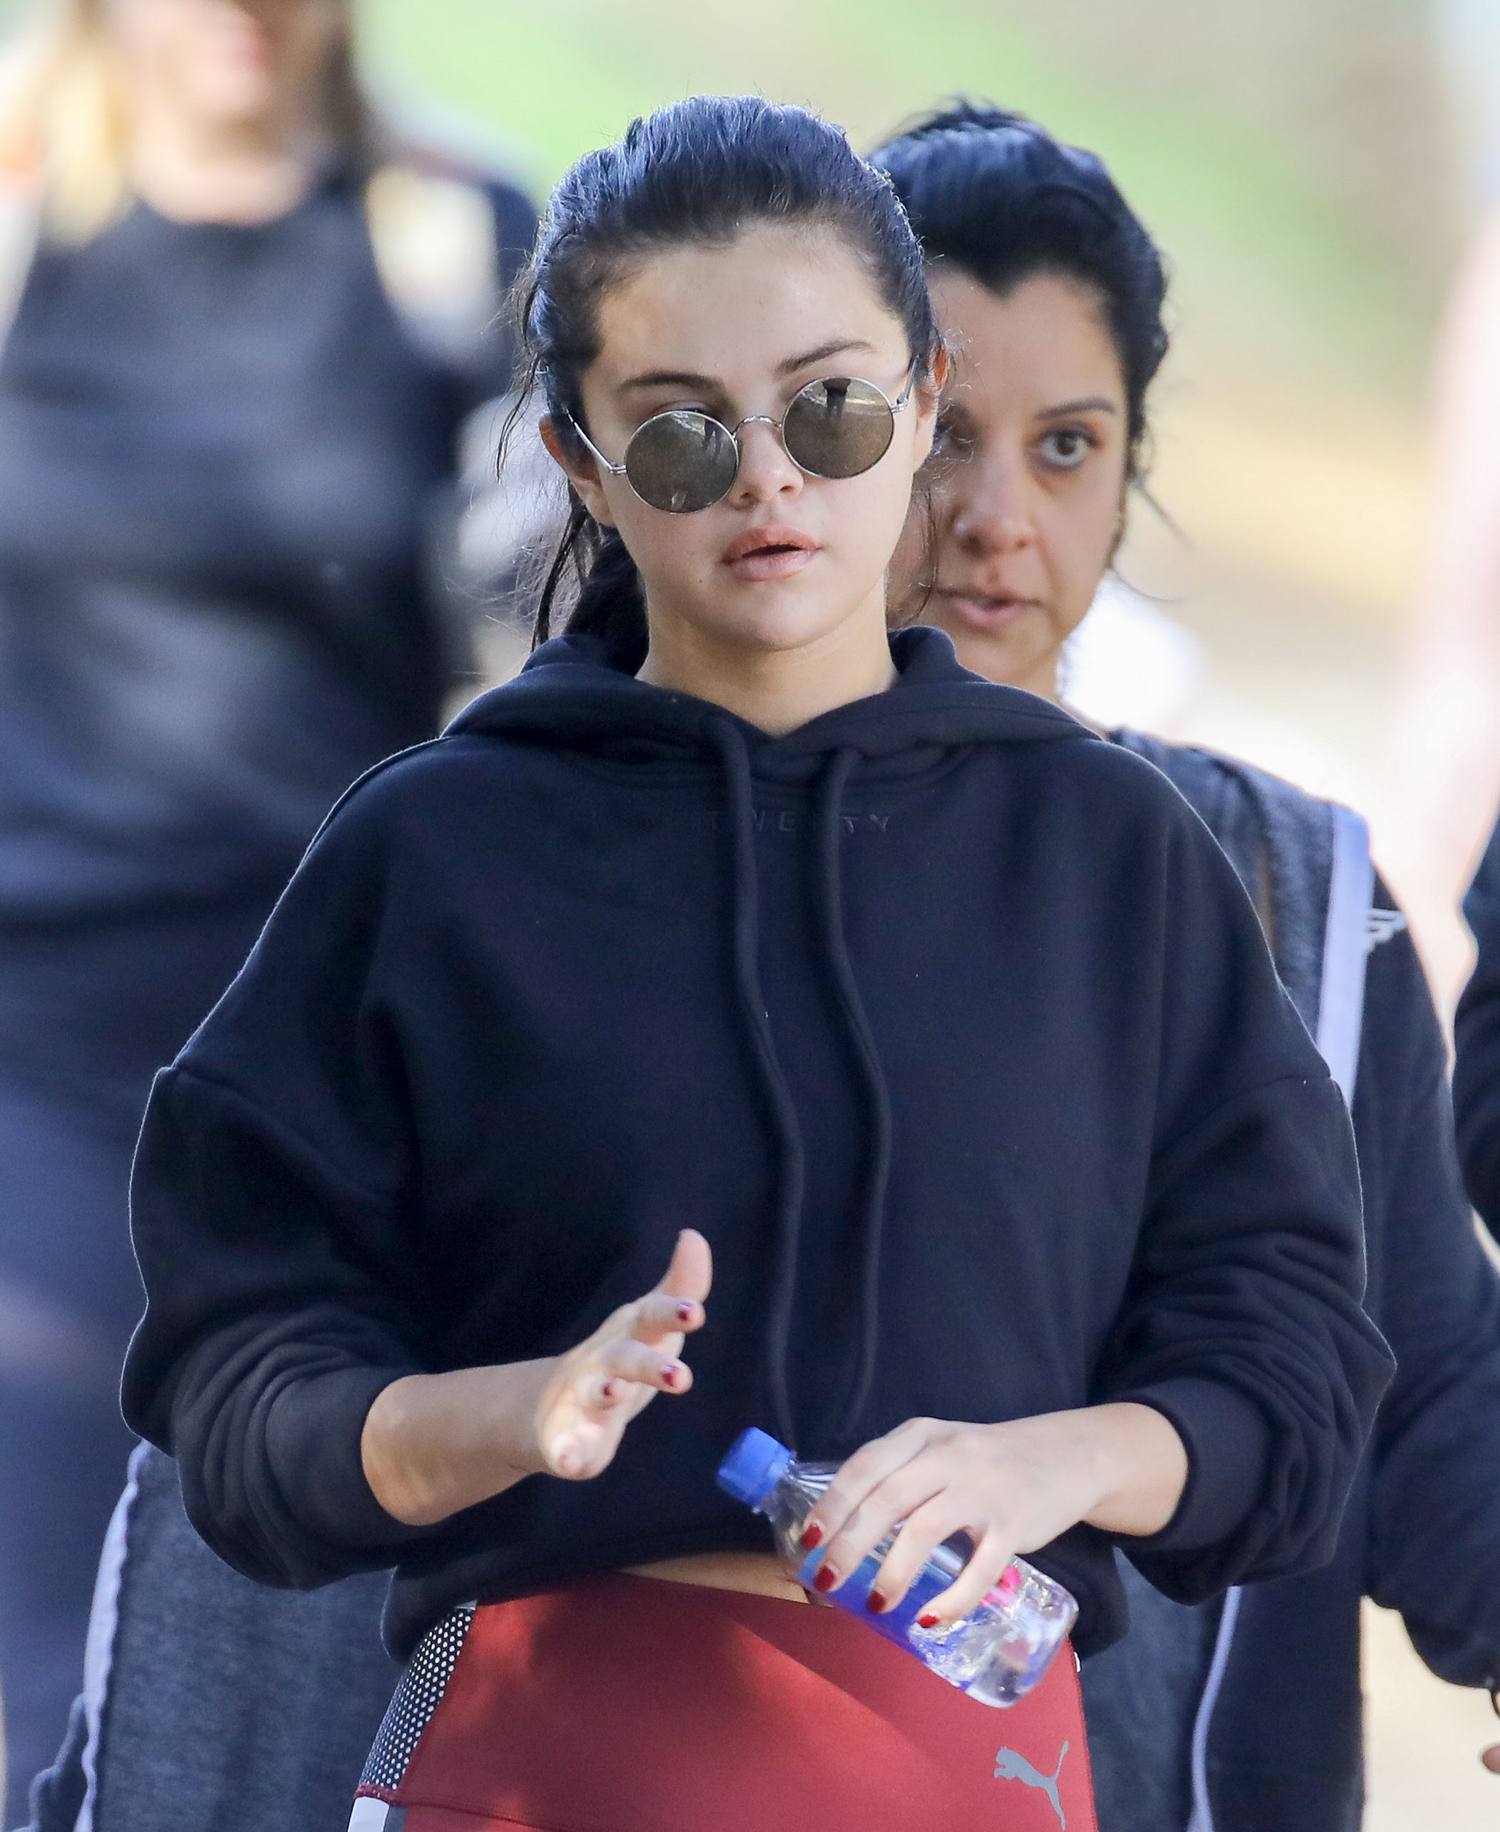 Selena_Gomez_-_Out_for_a_hike_in_Los_Angeles2C_2018-12-22-16.jpg